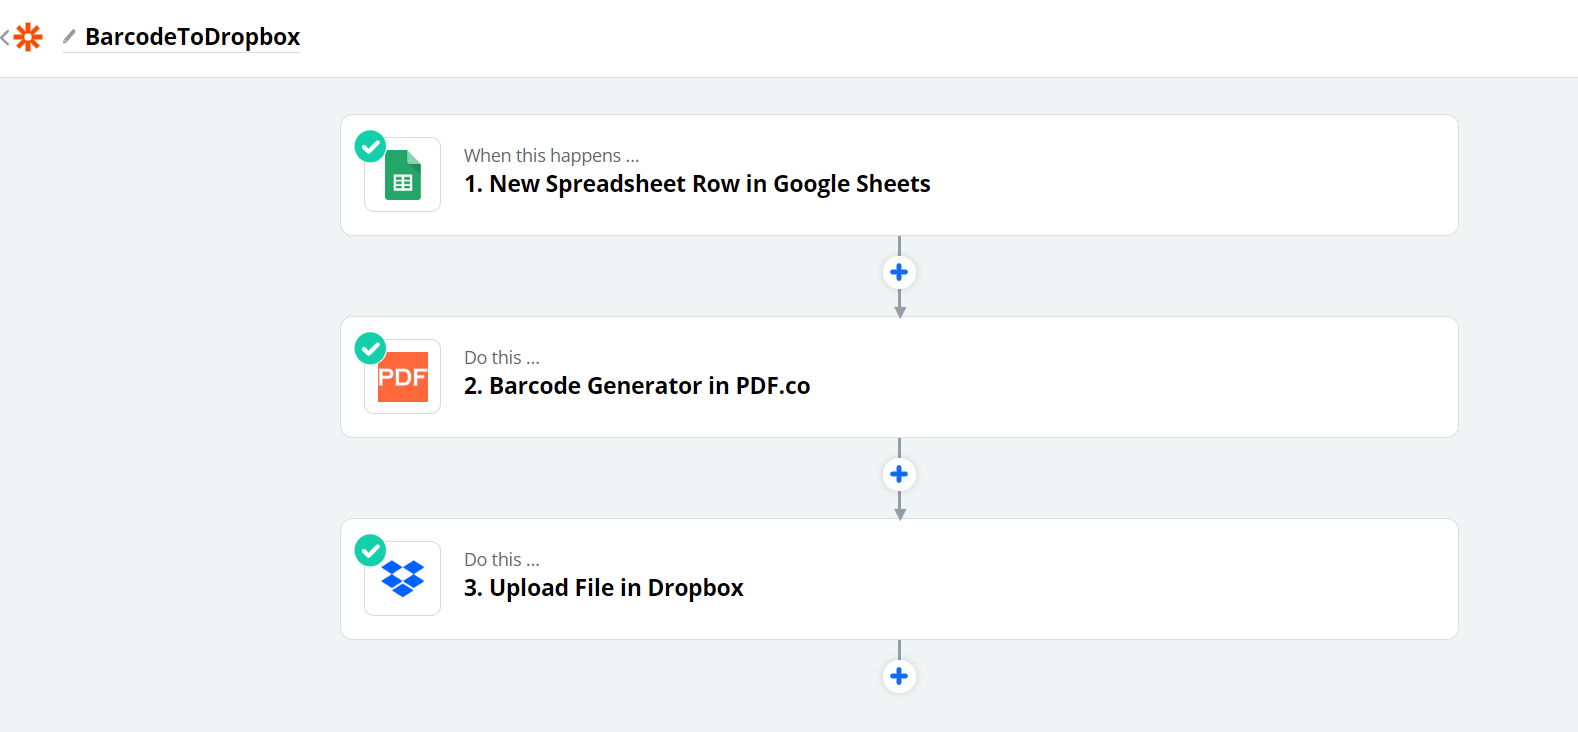 Overview From Spreadsheet, Barcode Generation, and Dropbox Storage